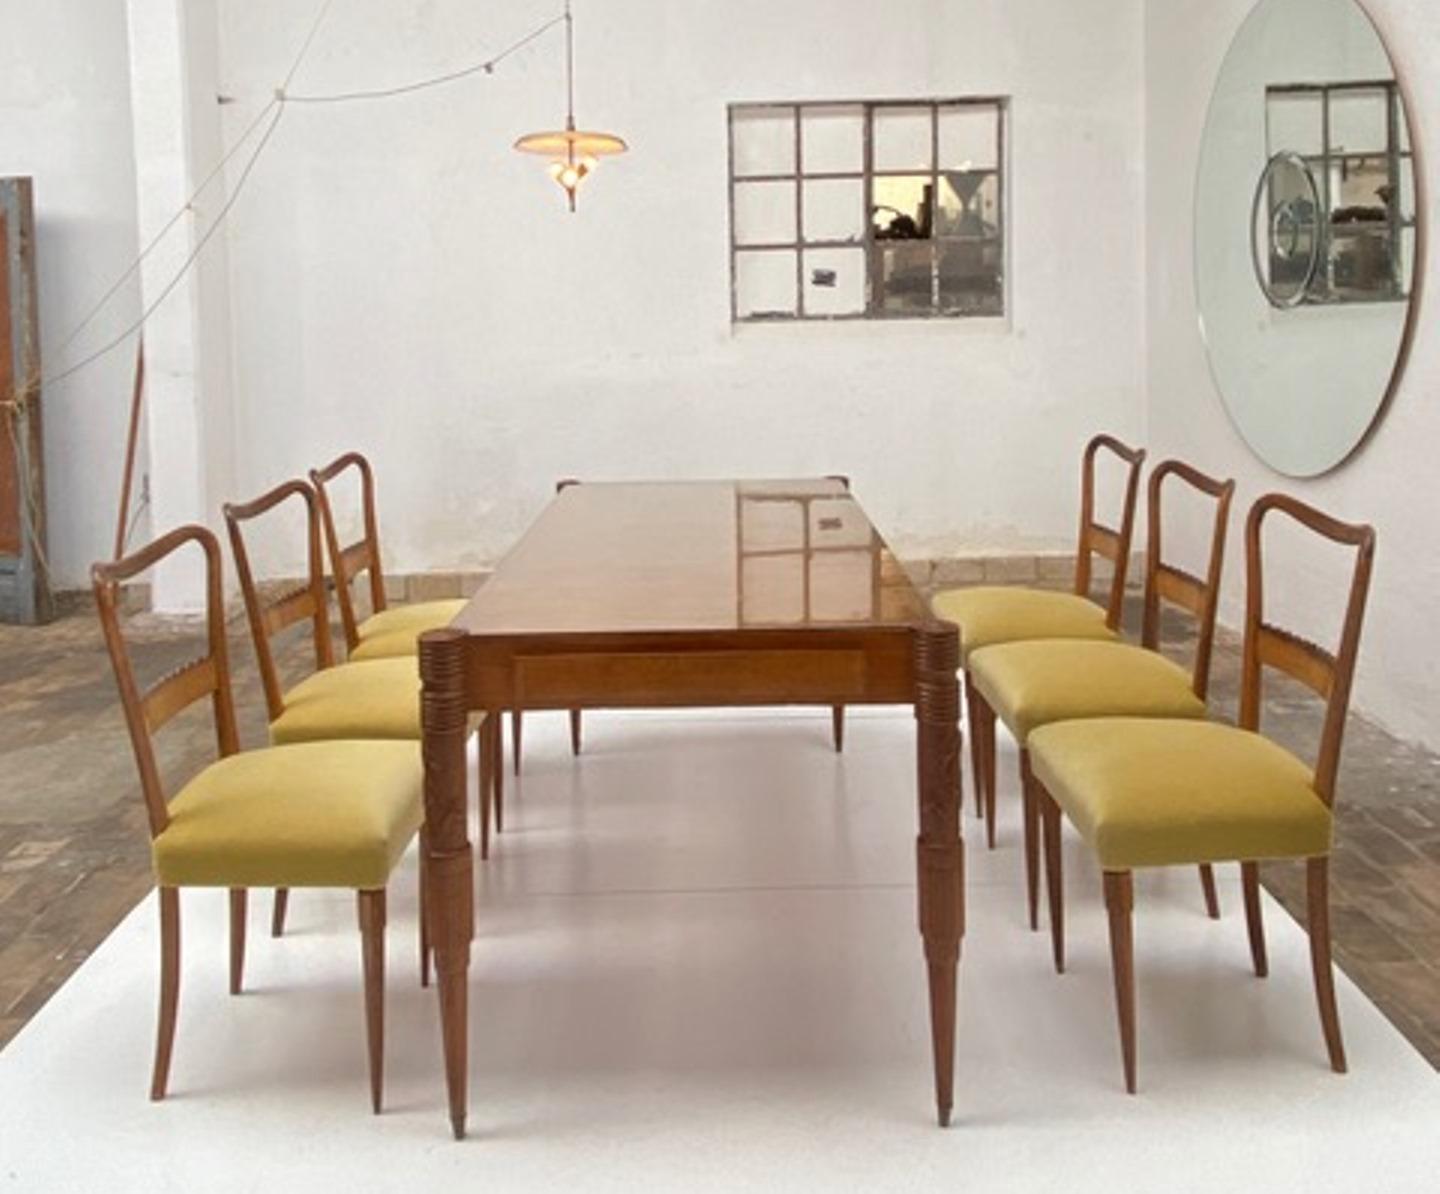 Stunning walnut dining table and six matching dining chairs by Pier Luigi Colli, handmade by the famed 'Fratelli Marelli' atelier in Cantu, Italy circa 1950. 

The dining table is finished in solid and veneered italian walnut with a protective